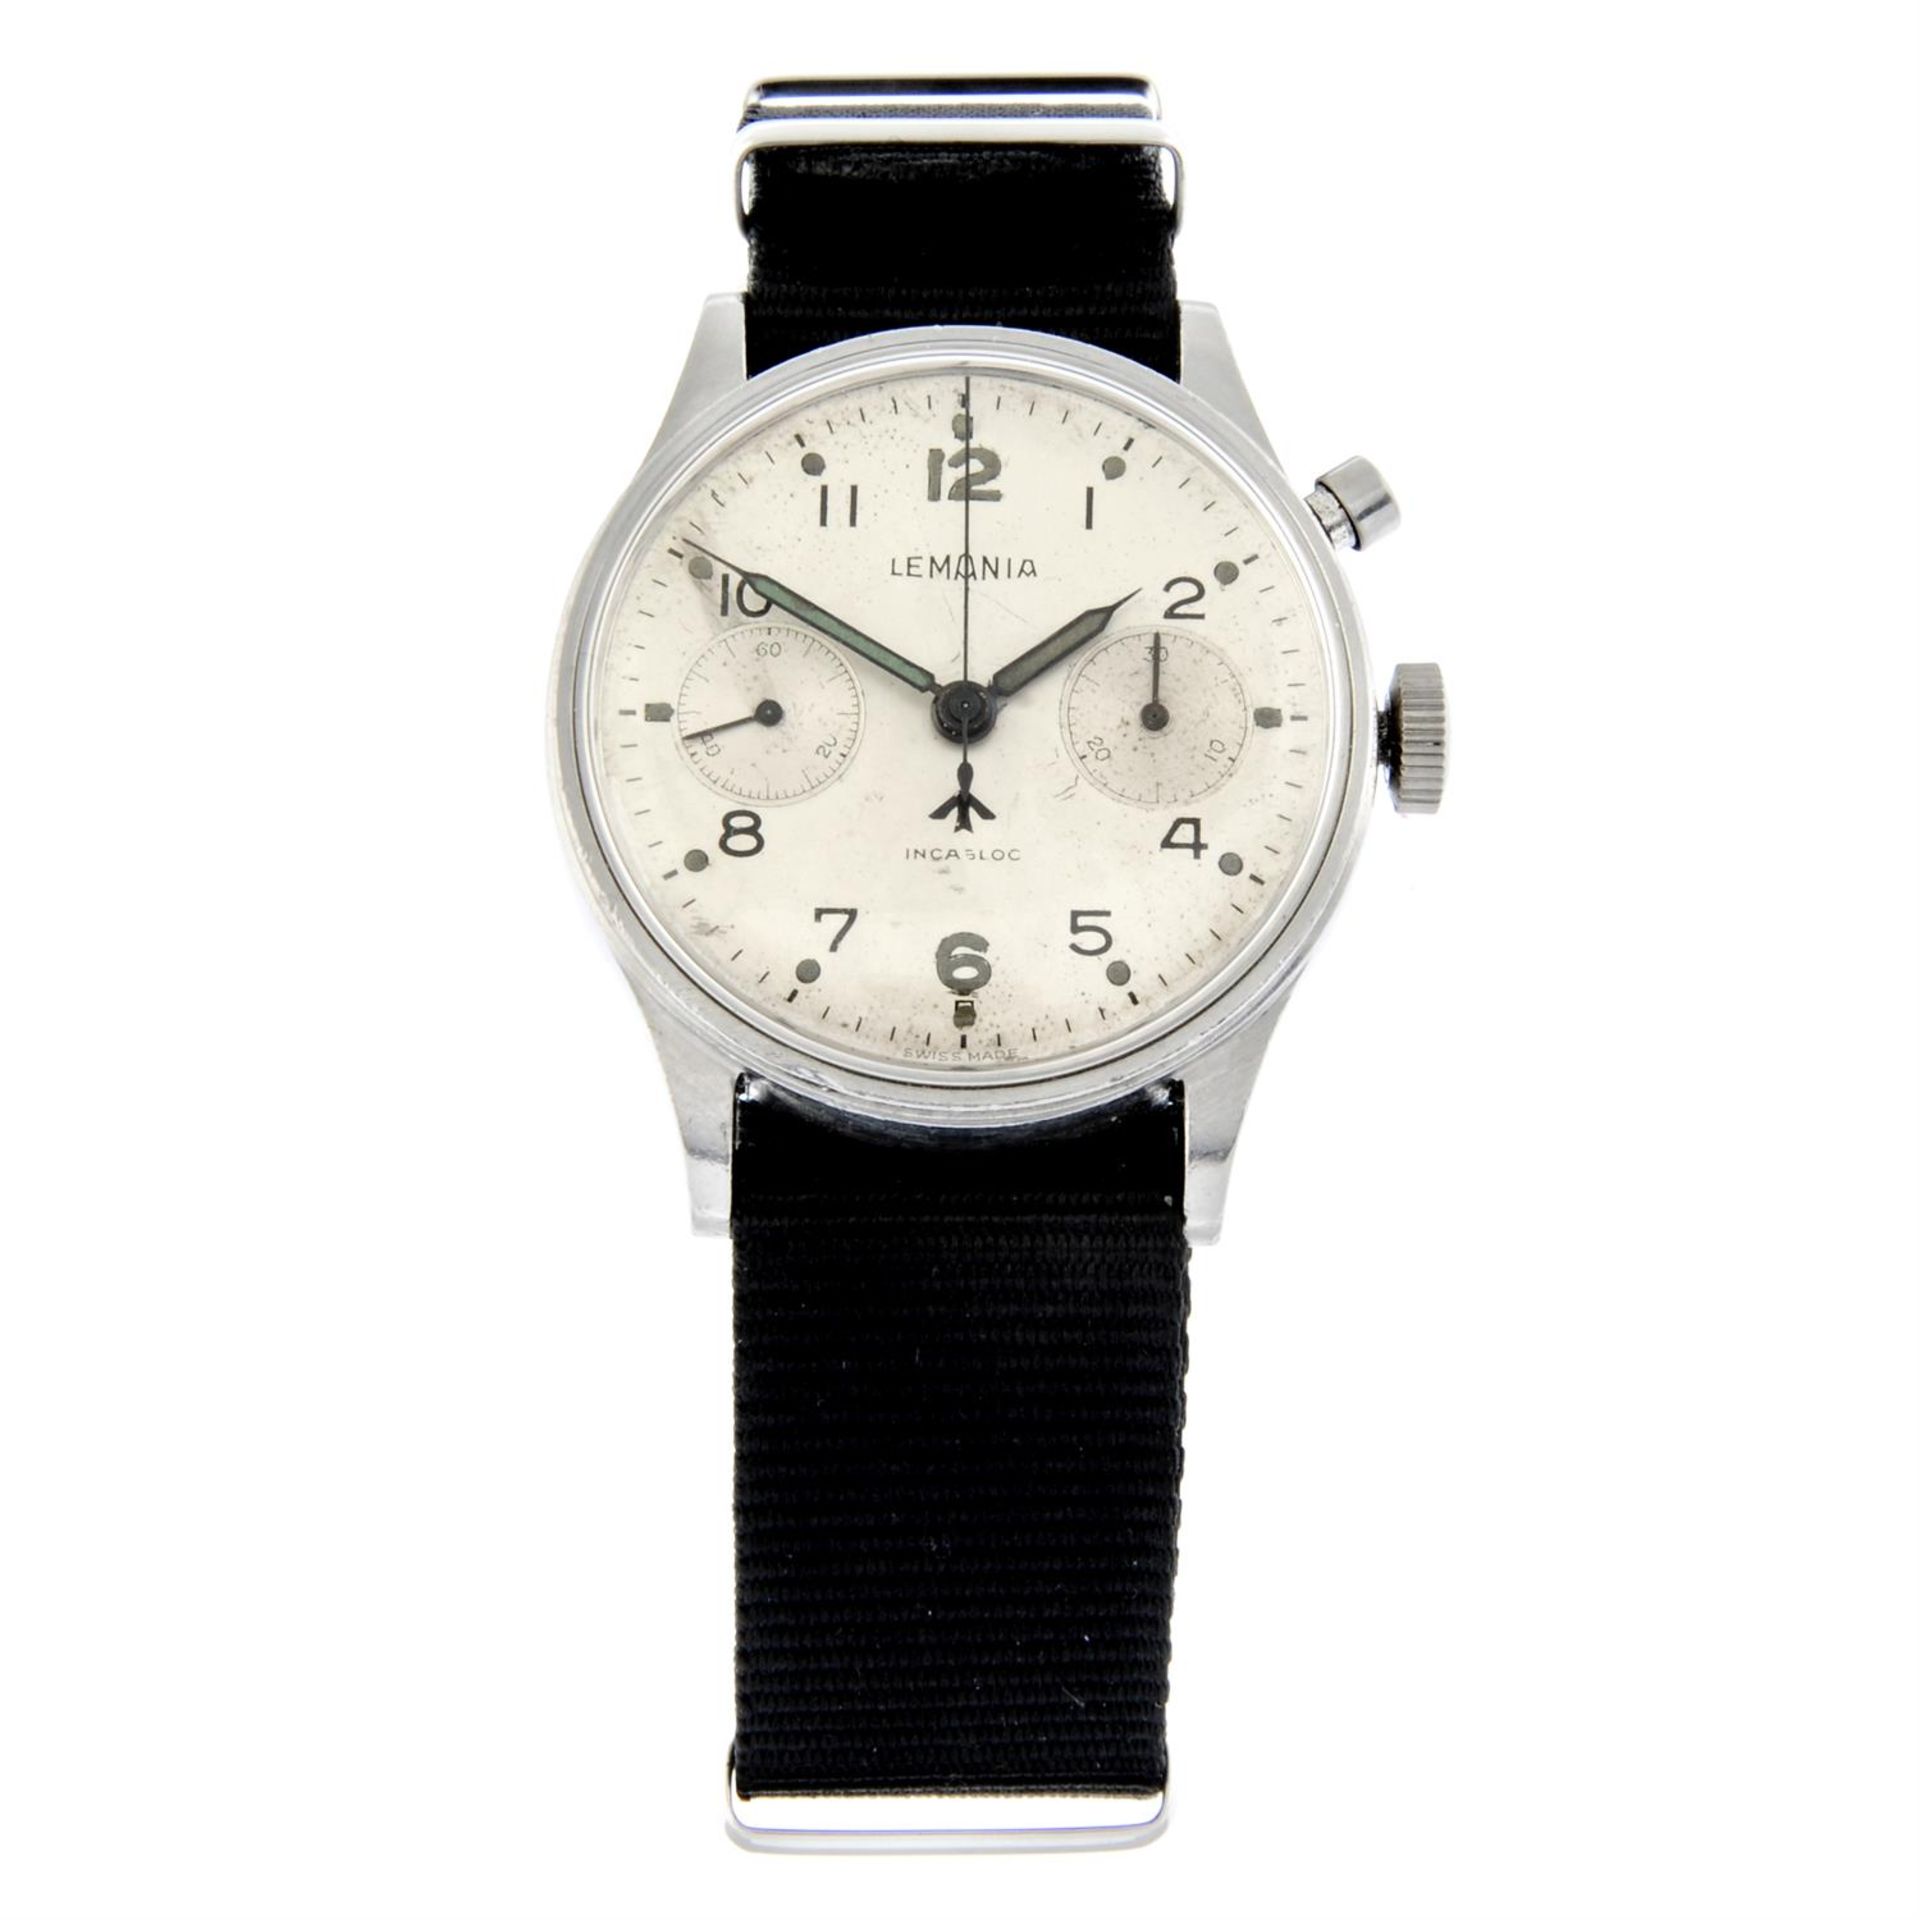 Lemania - a military issue chronograph watch, 38mm.